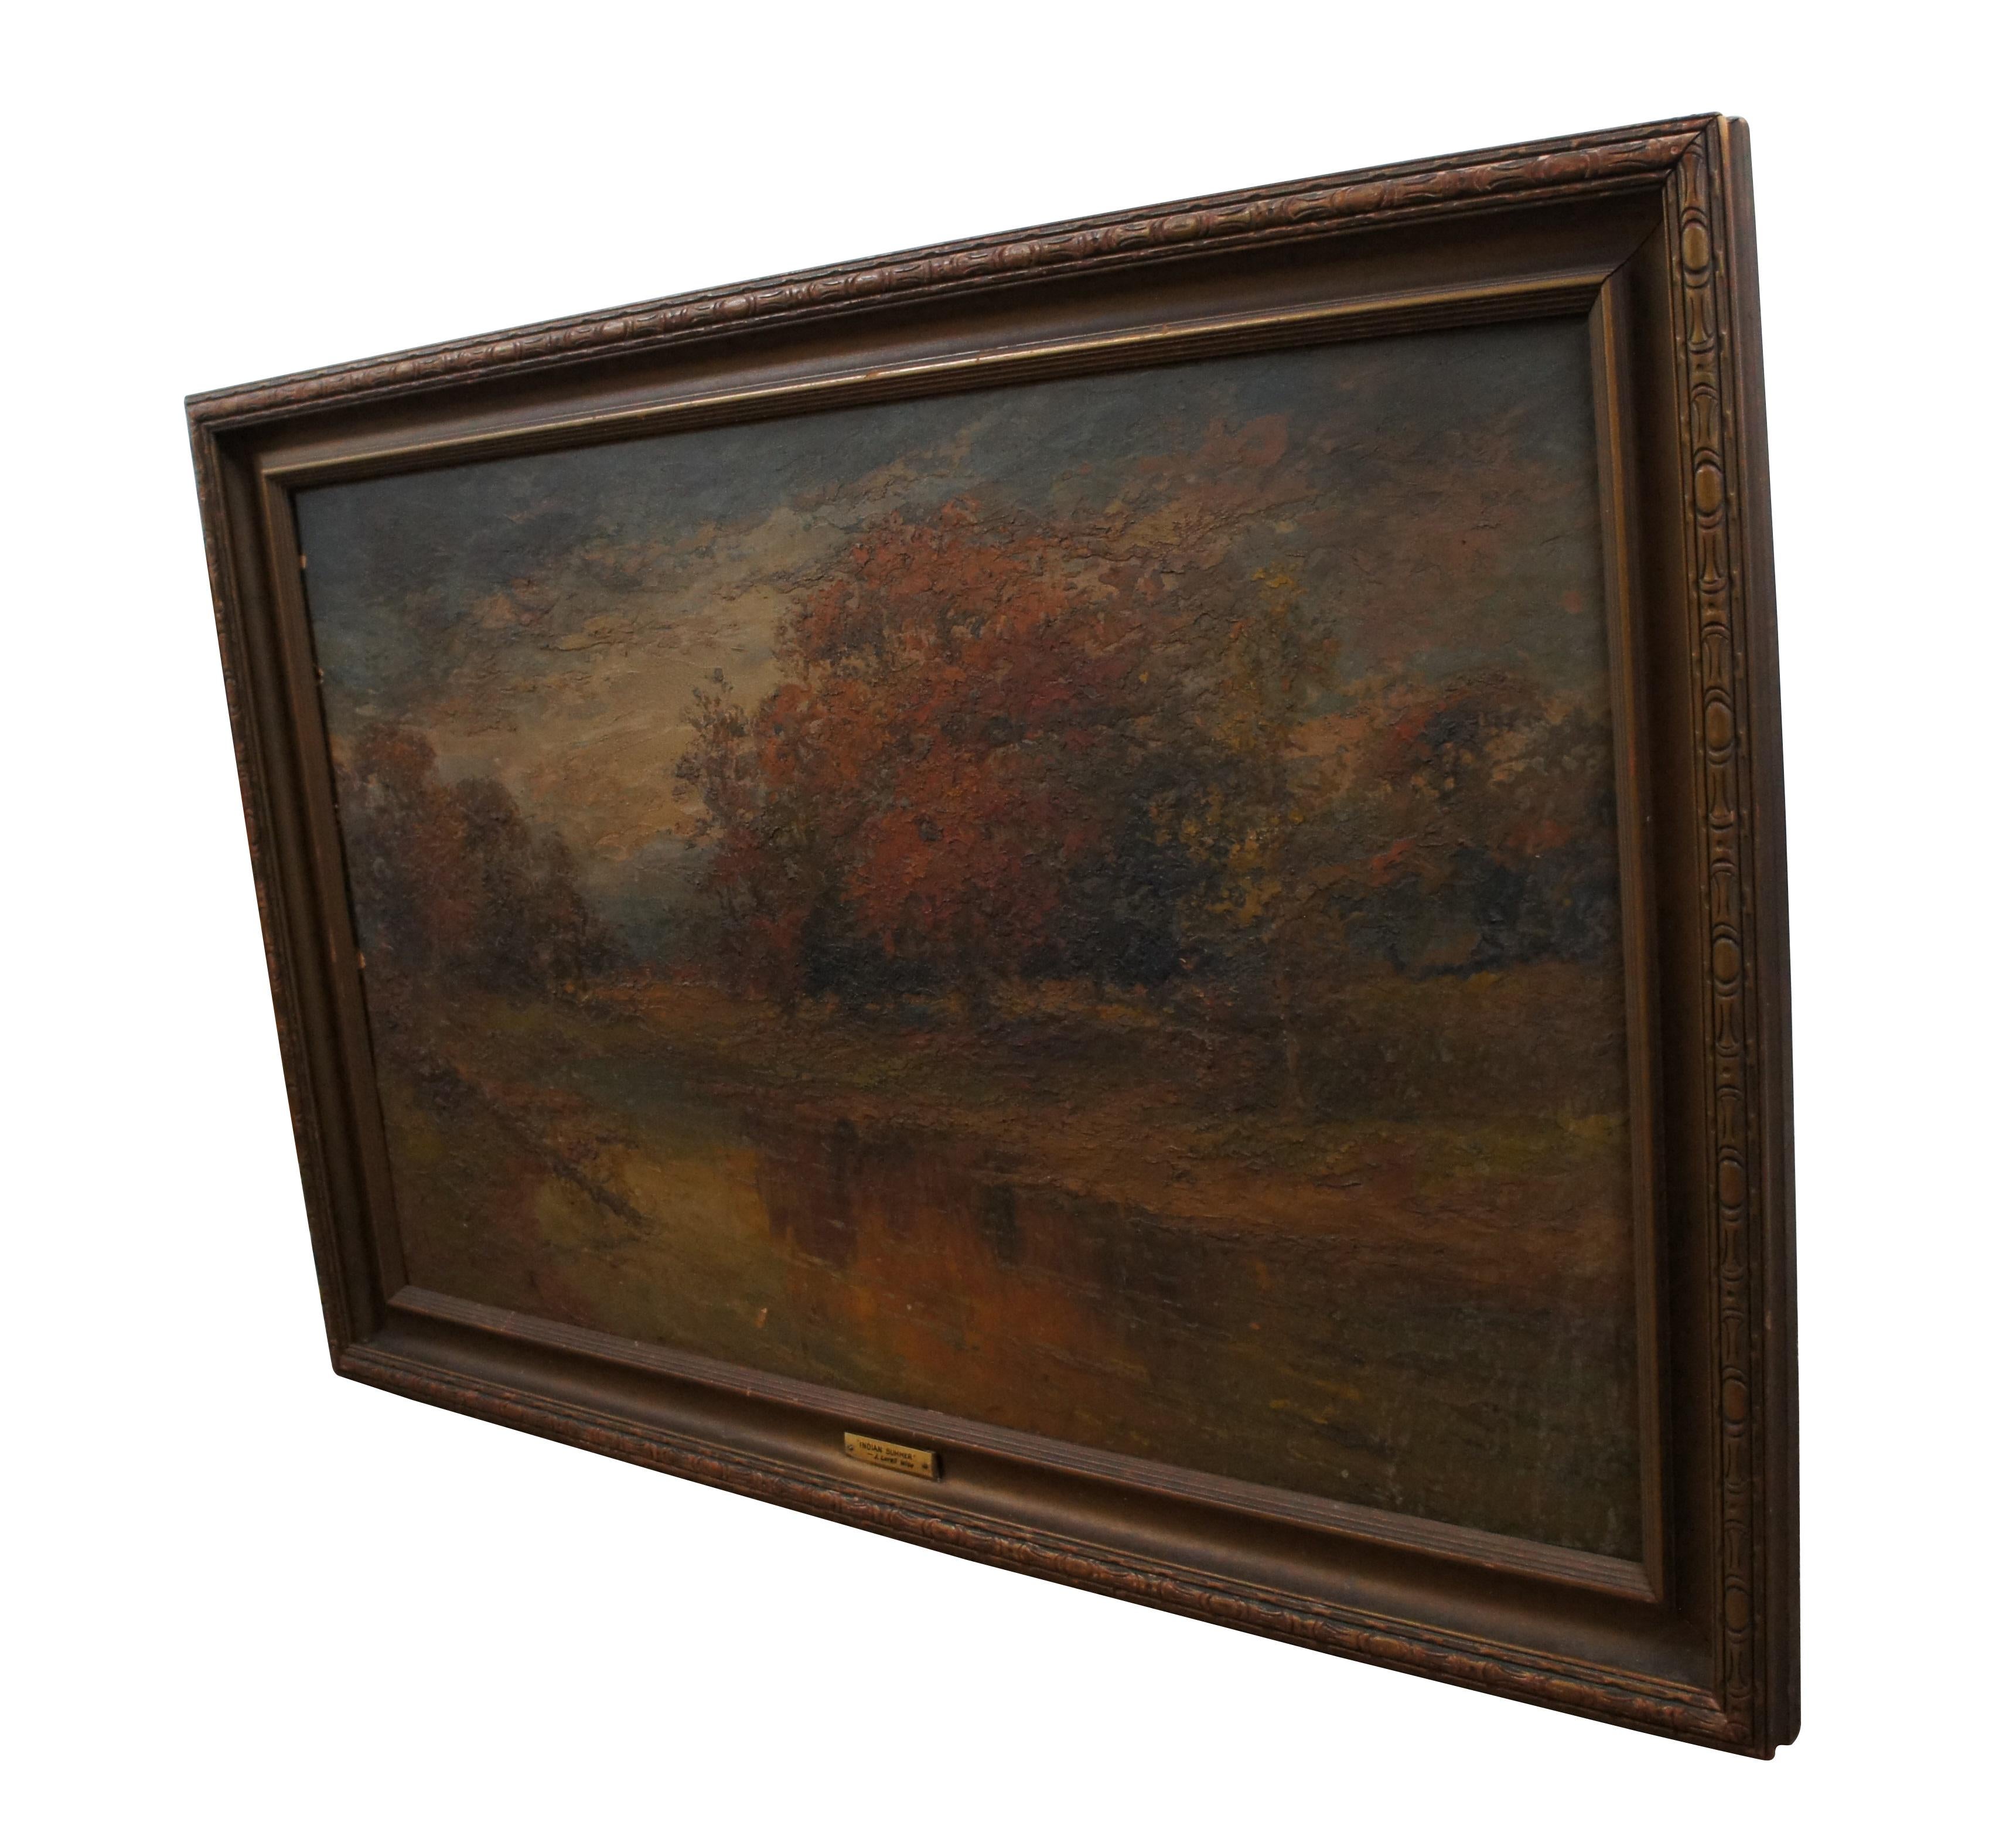 Early 20th century oil on canvas impressionist landscape painting of autumn trees along a river, titled 